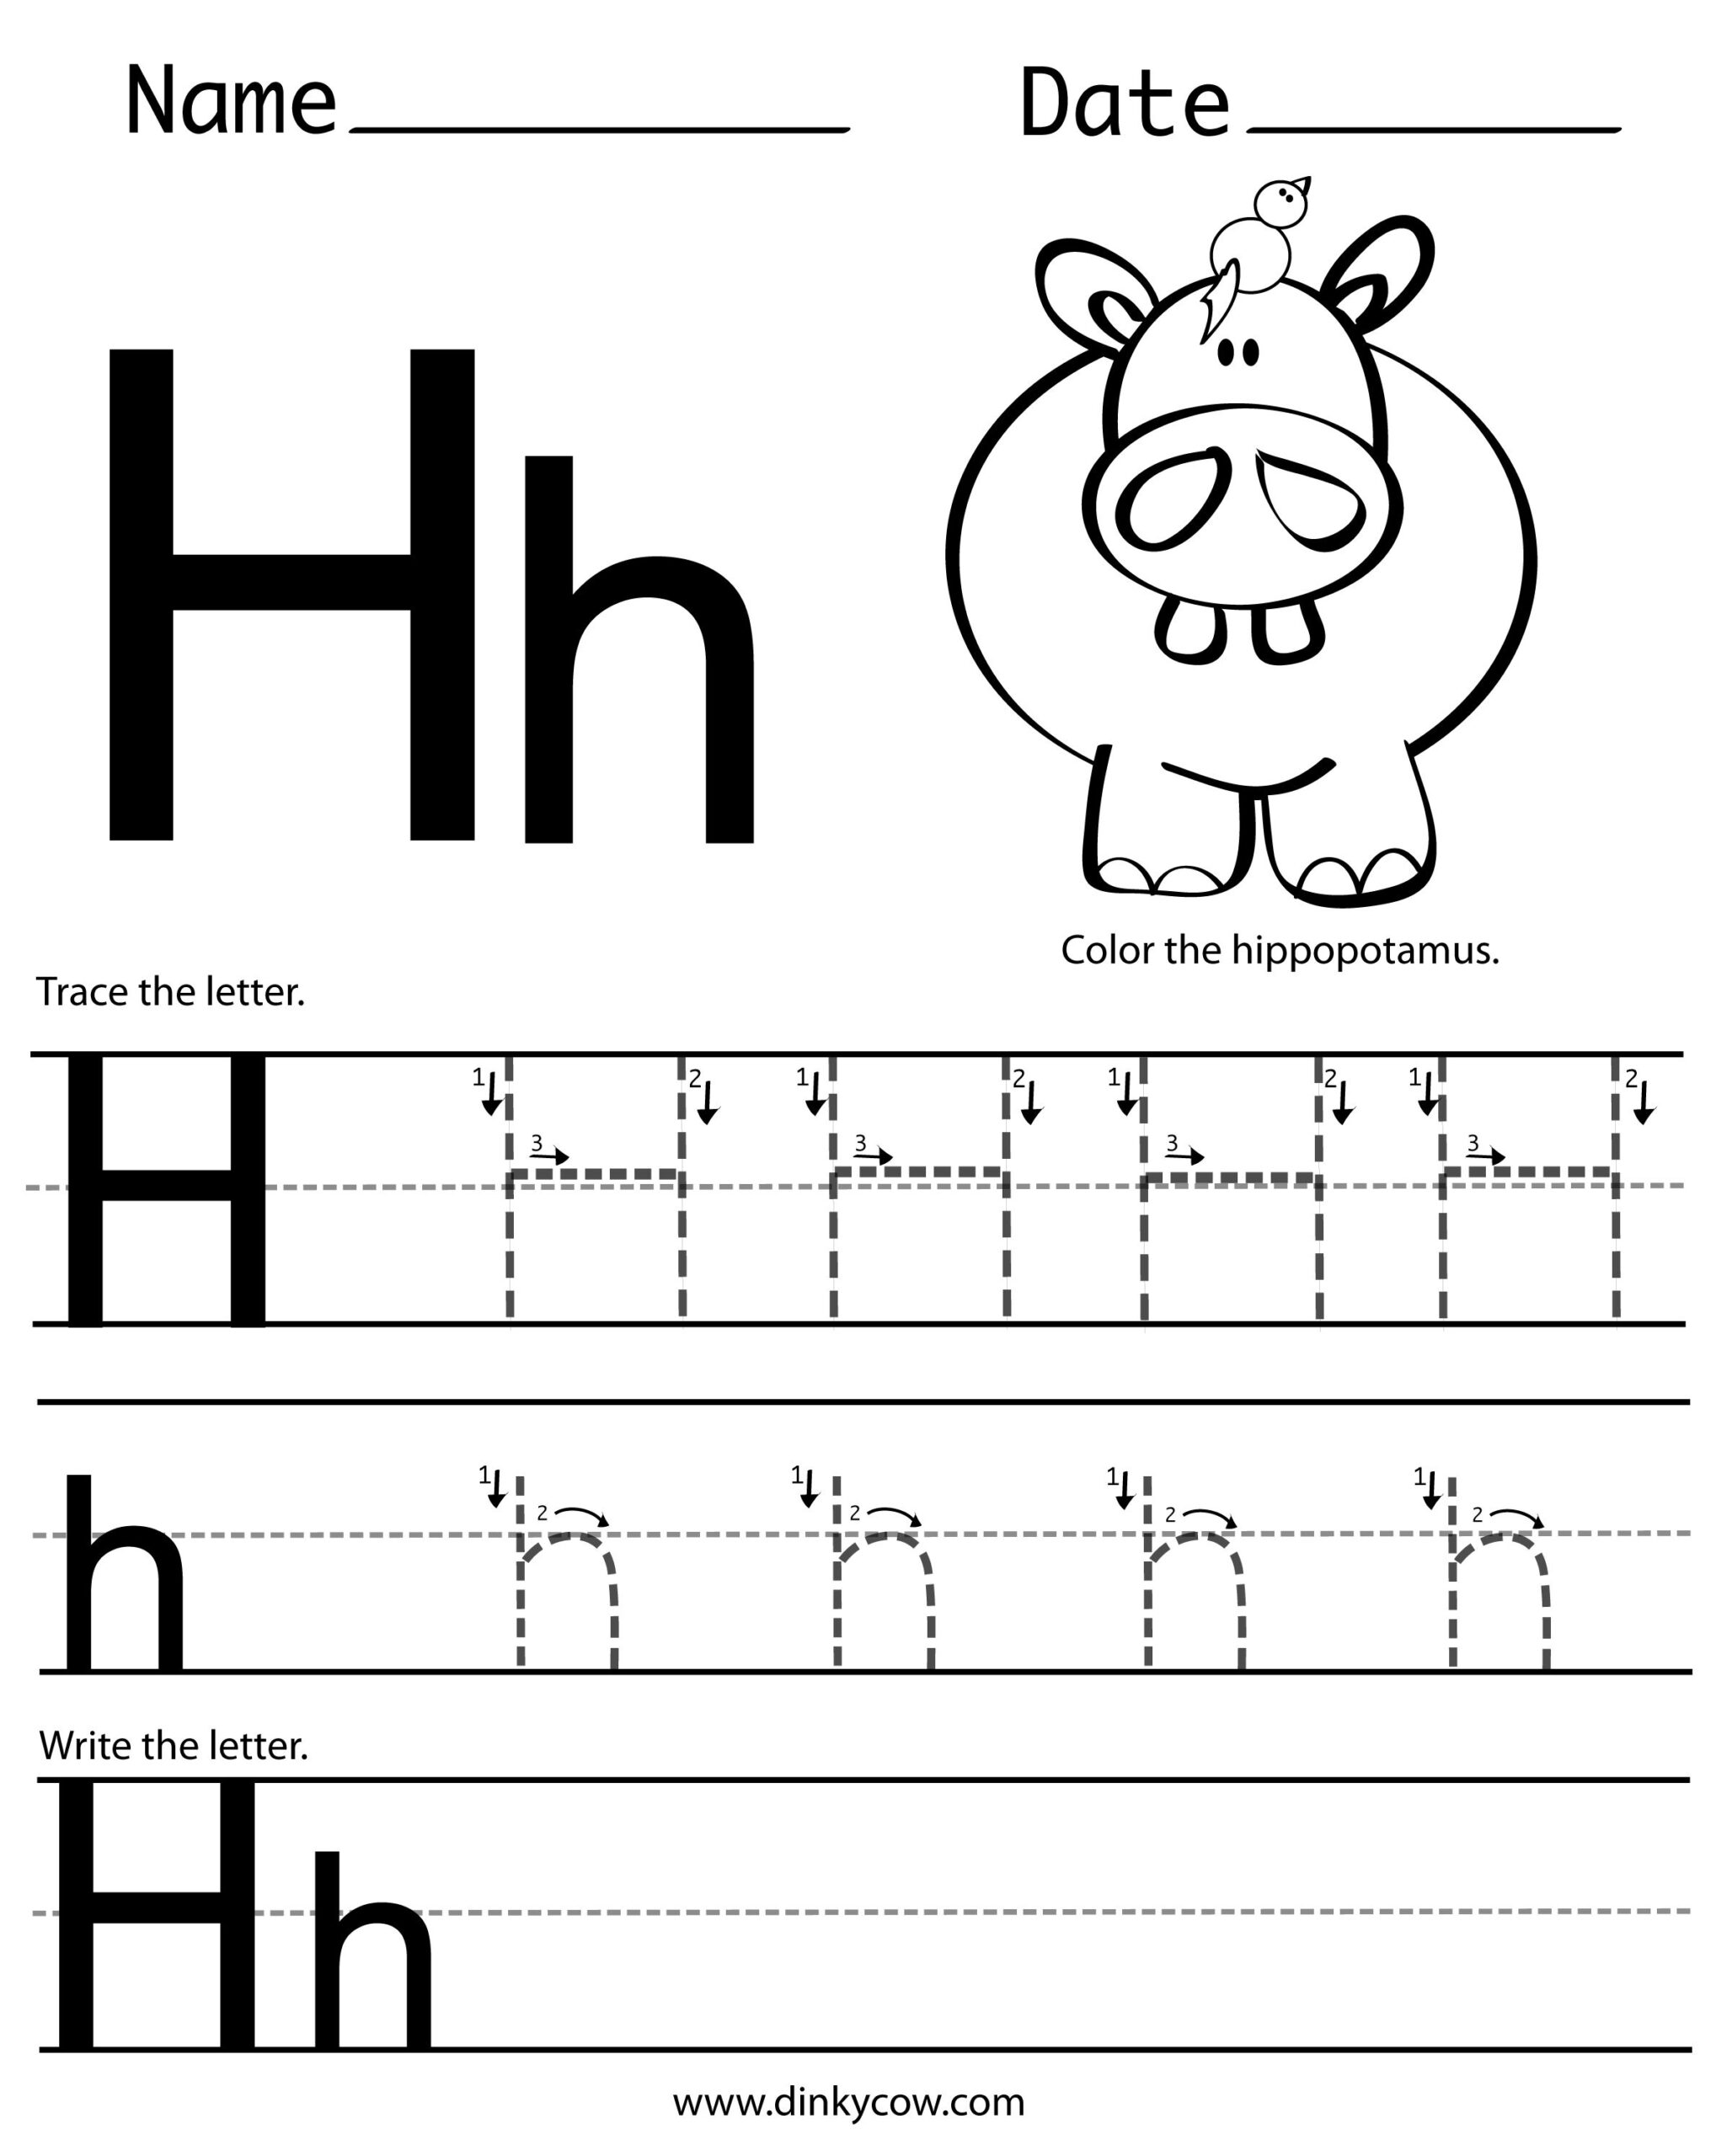 Pinkirsten On Home Schooling | Letter H Worksheets, Free with Letter H Worksheets Free